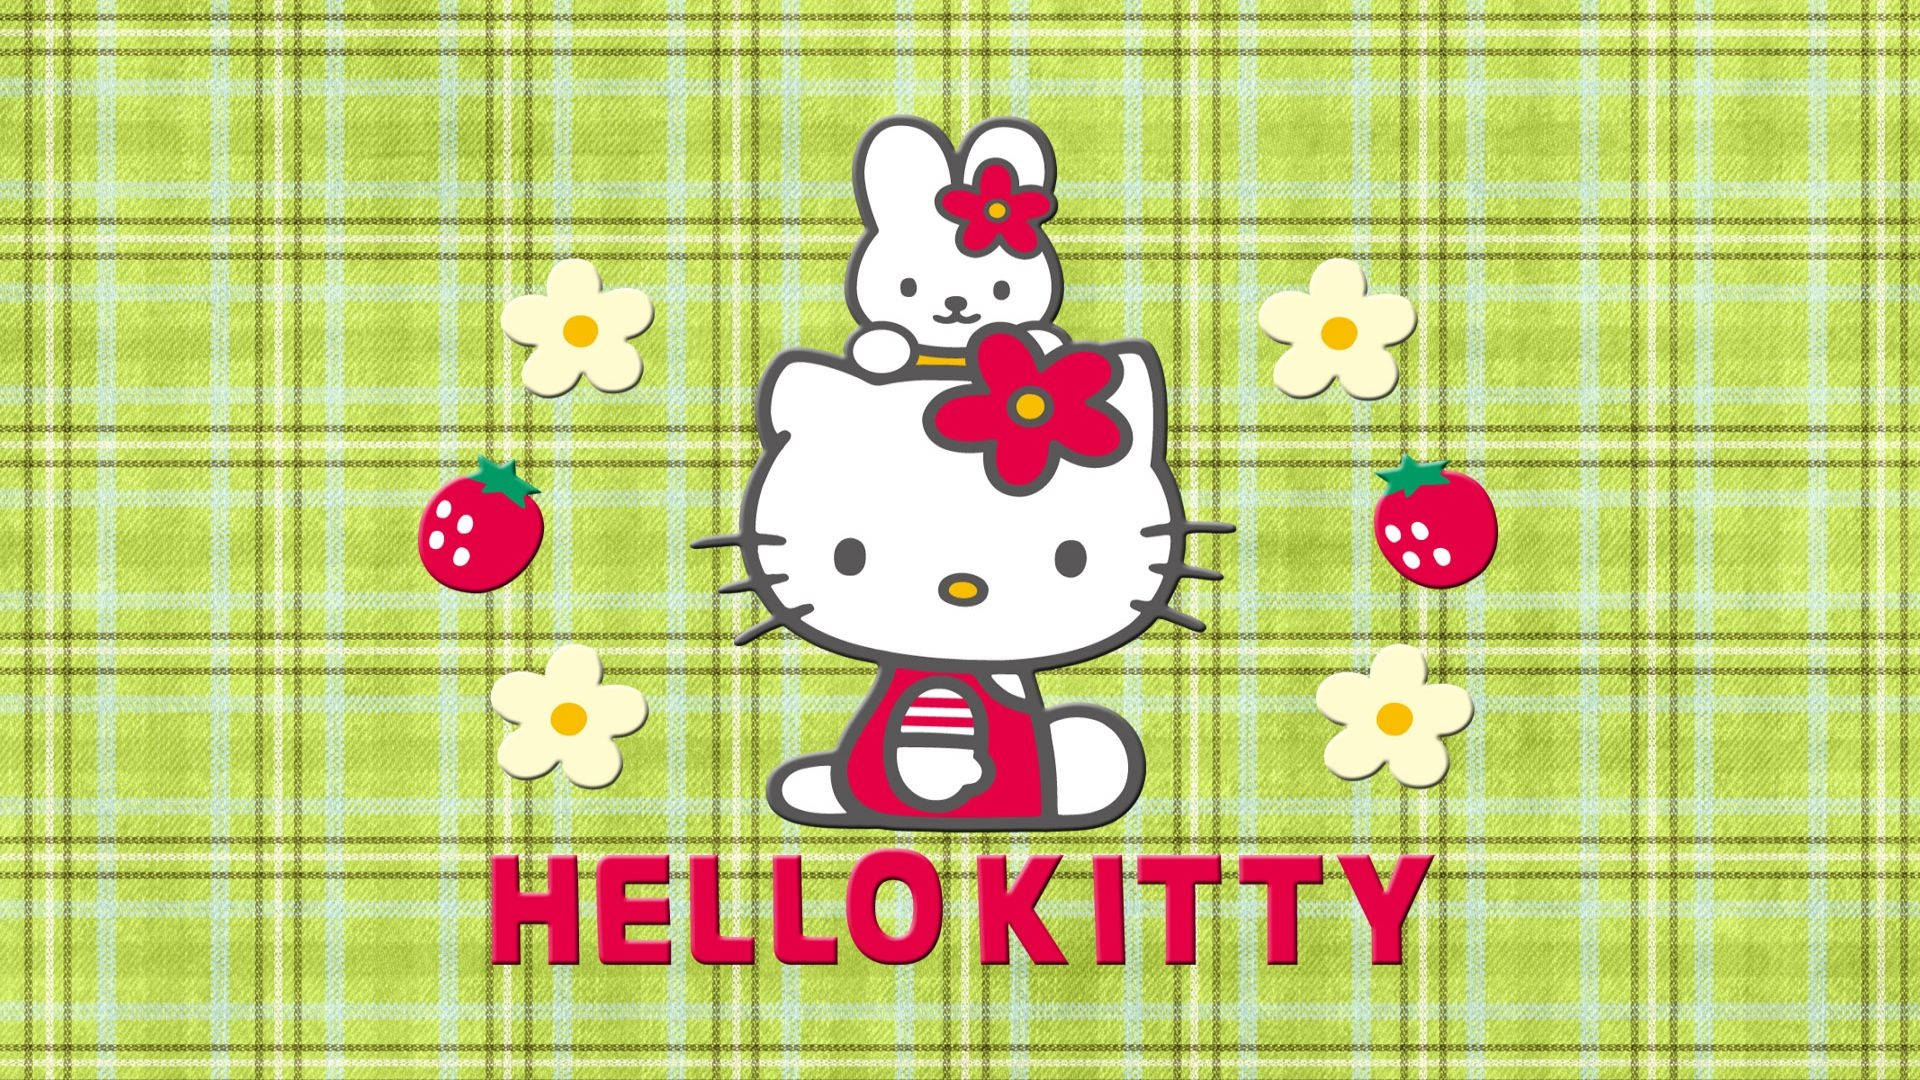 Hello kitty wallpaper with strawberries and flowers - Sanrio